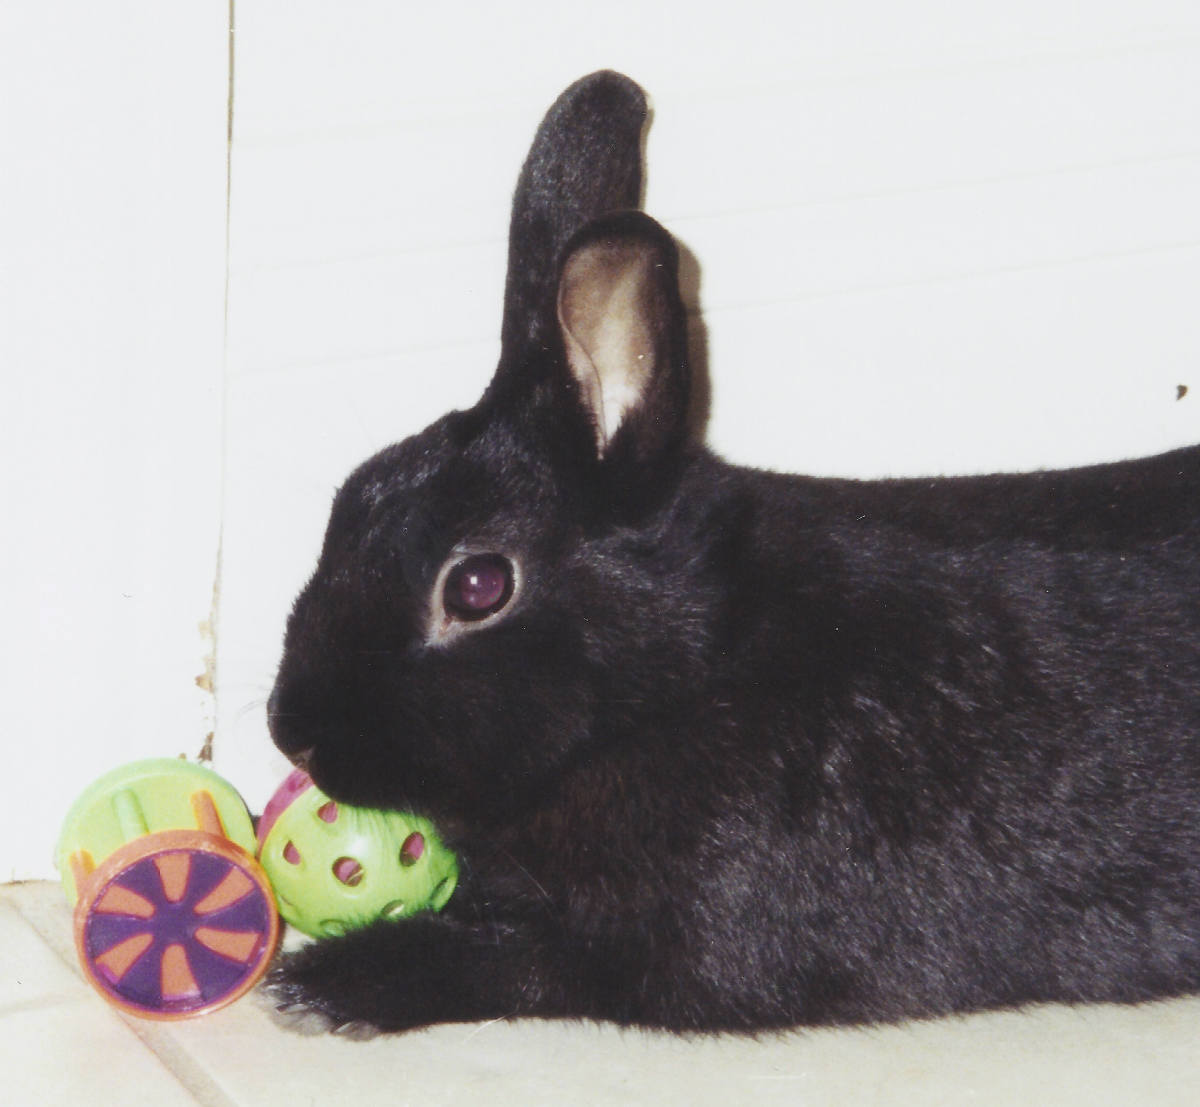 Rabbits love to play with simple toys.